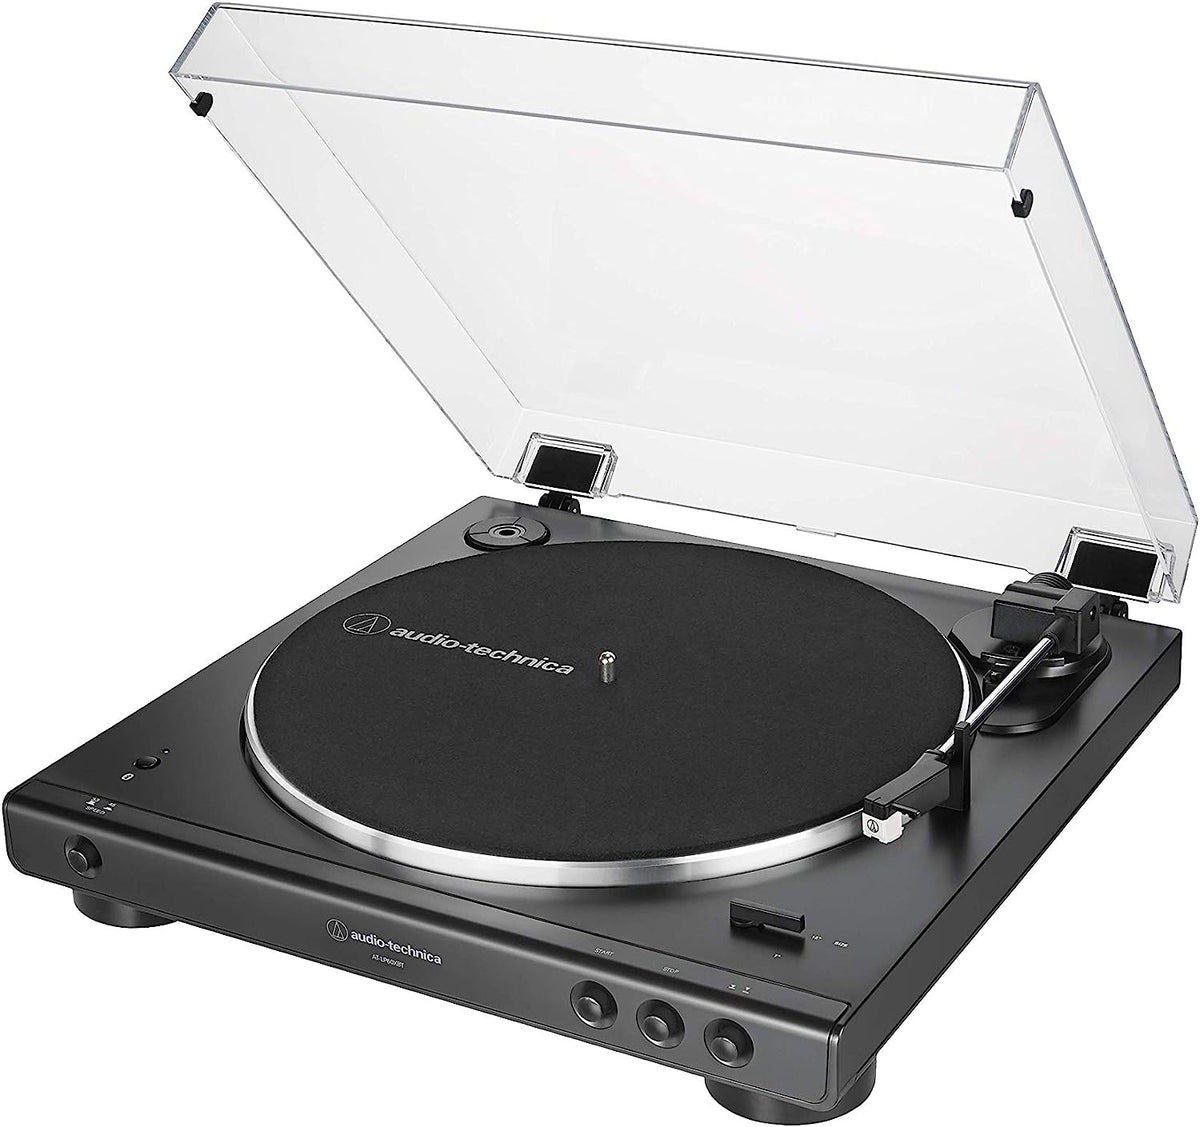  Audio-Technica AT-LP60XBT-BK Fully Automatic Bluetooth Belt-Drive Stereo Turntable, Black, Hi-Fi, 2 Speed, Dust Cover, Anti-Resonance, Die-cast Aluminum Platter side view